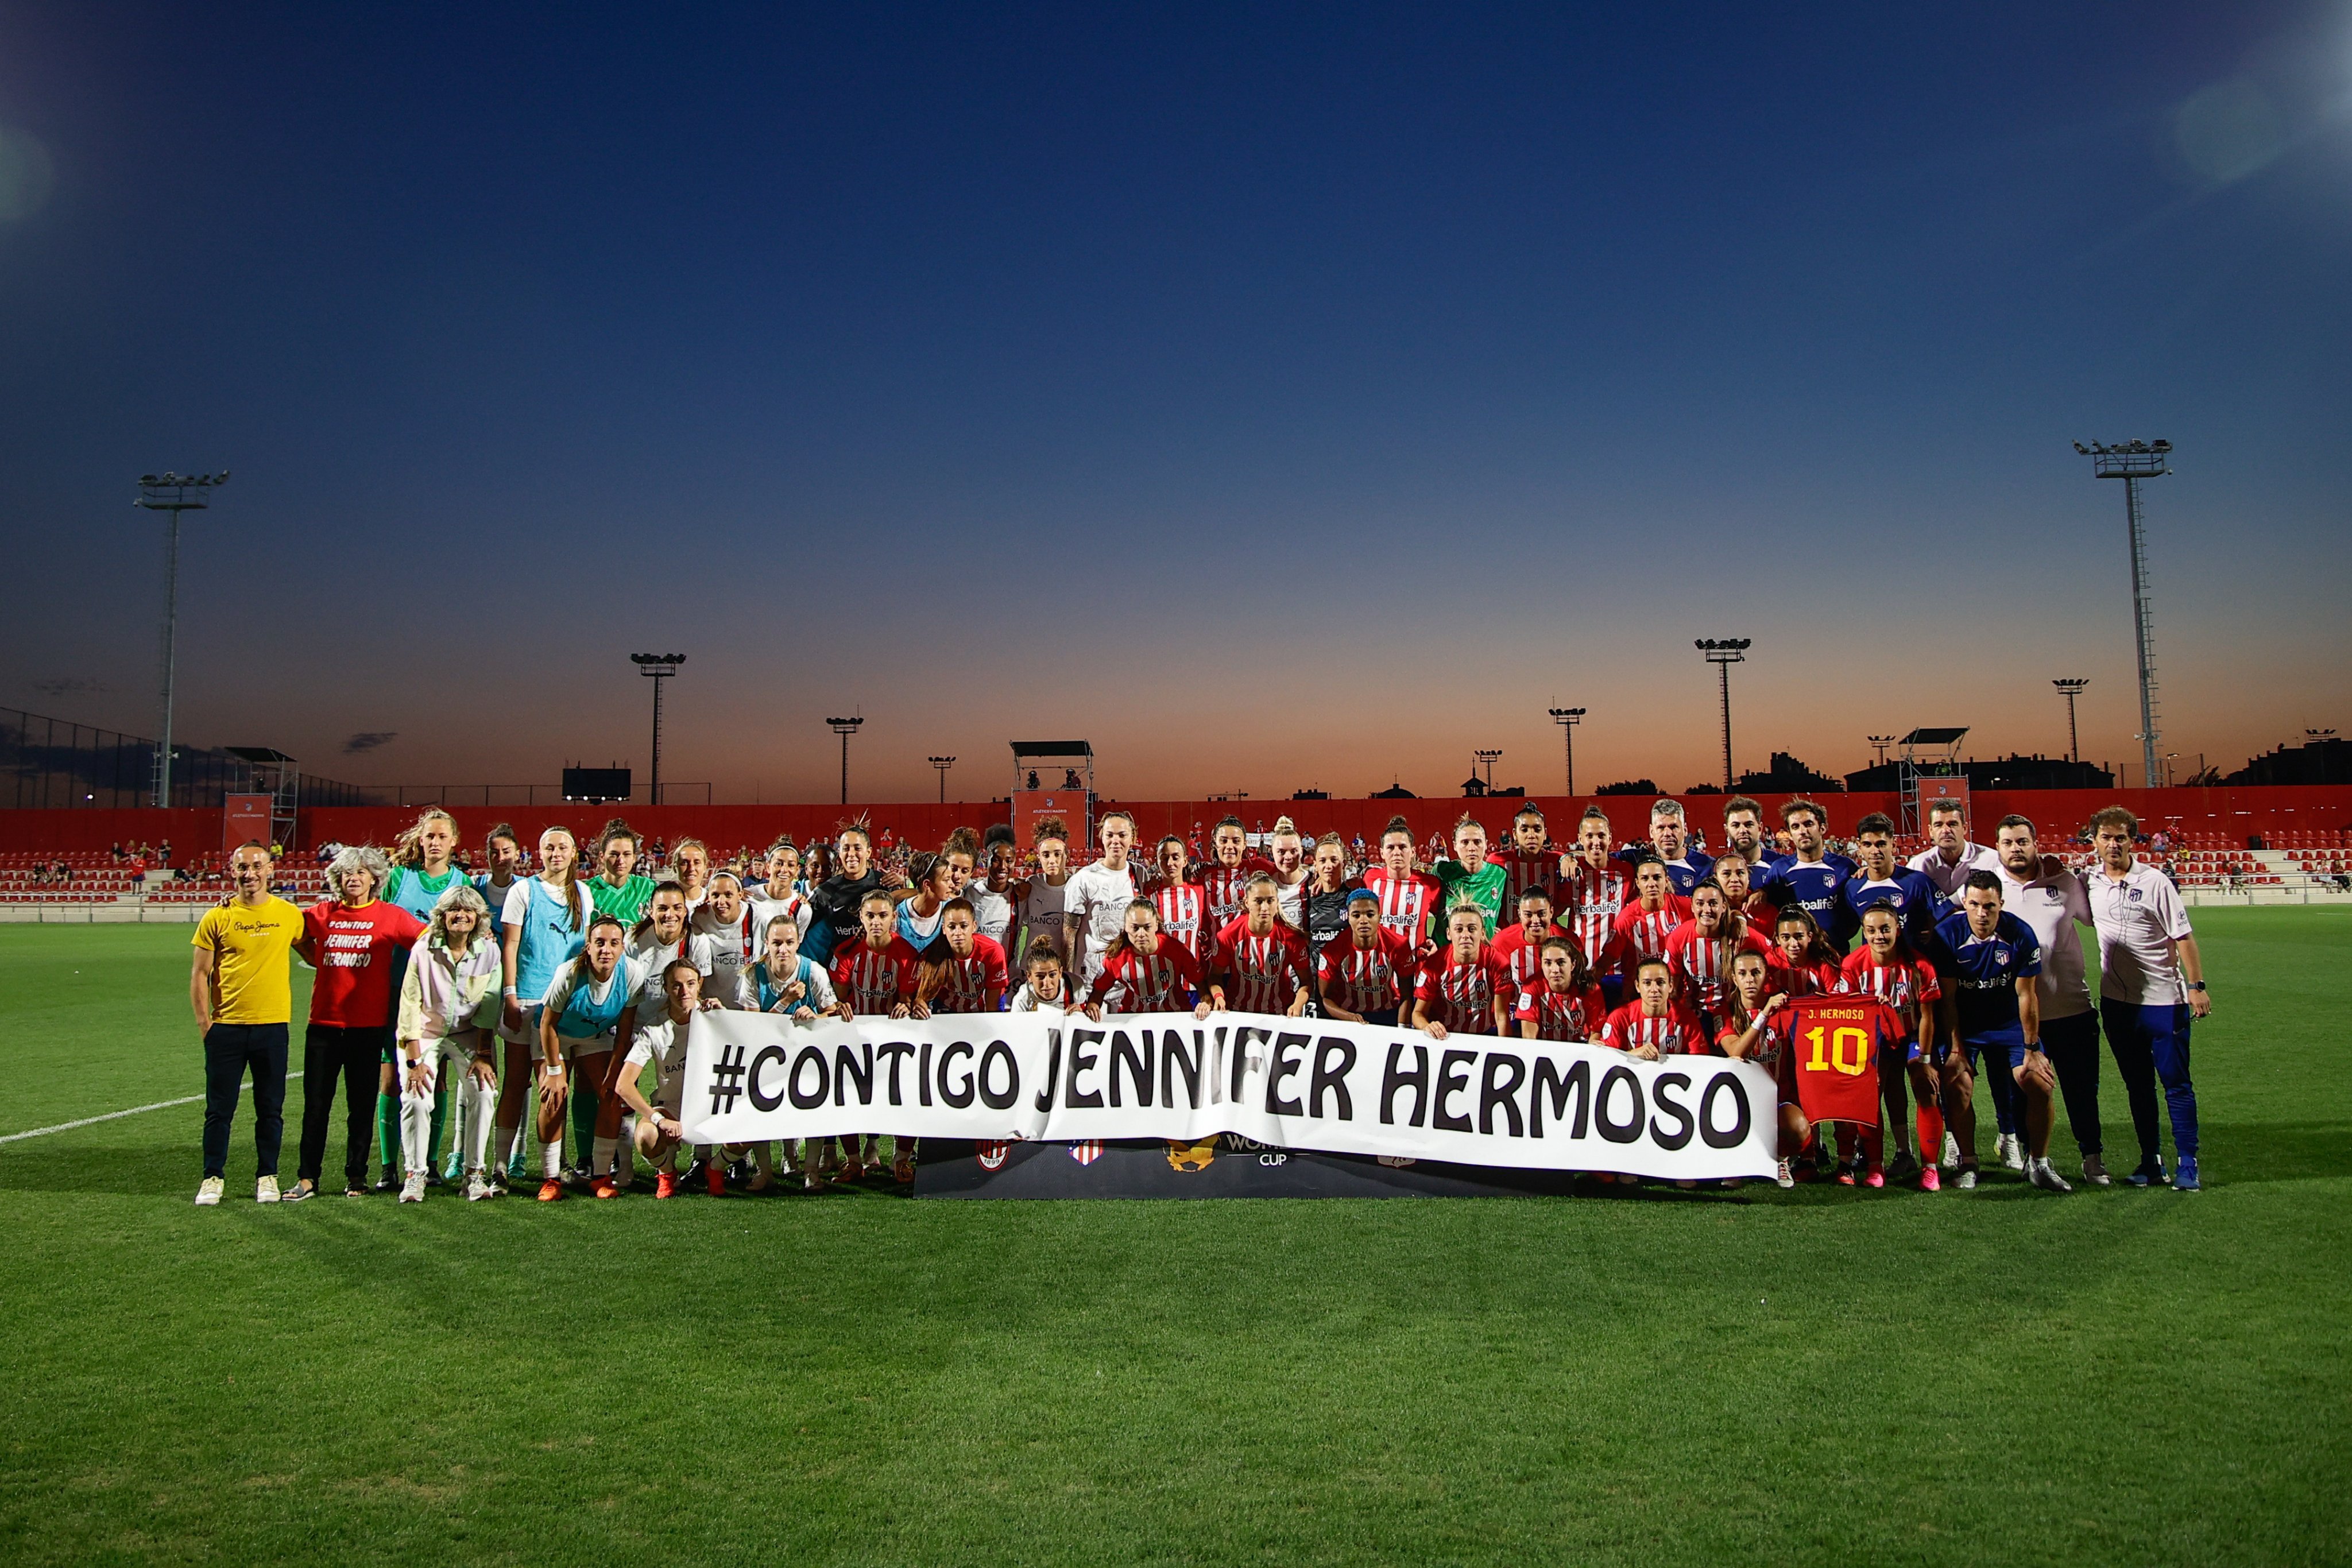 The players of Atlético Madrid and AC Milan holding up a banner in support of Jenni Hermoso, who is a former Atléti player